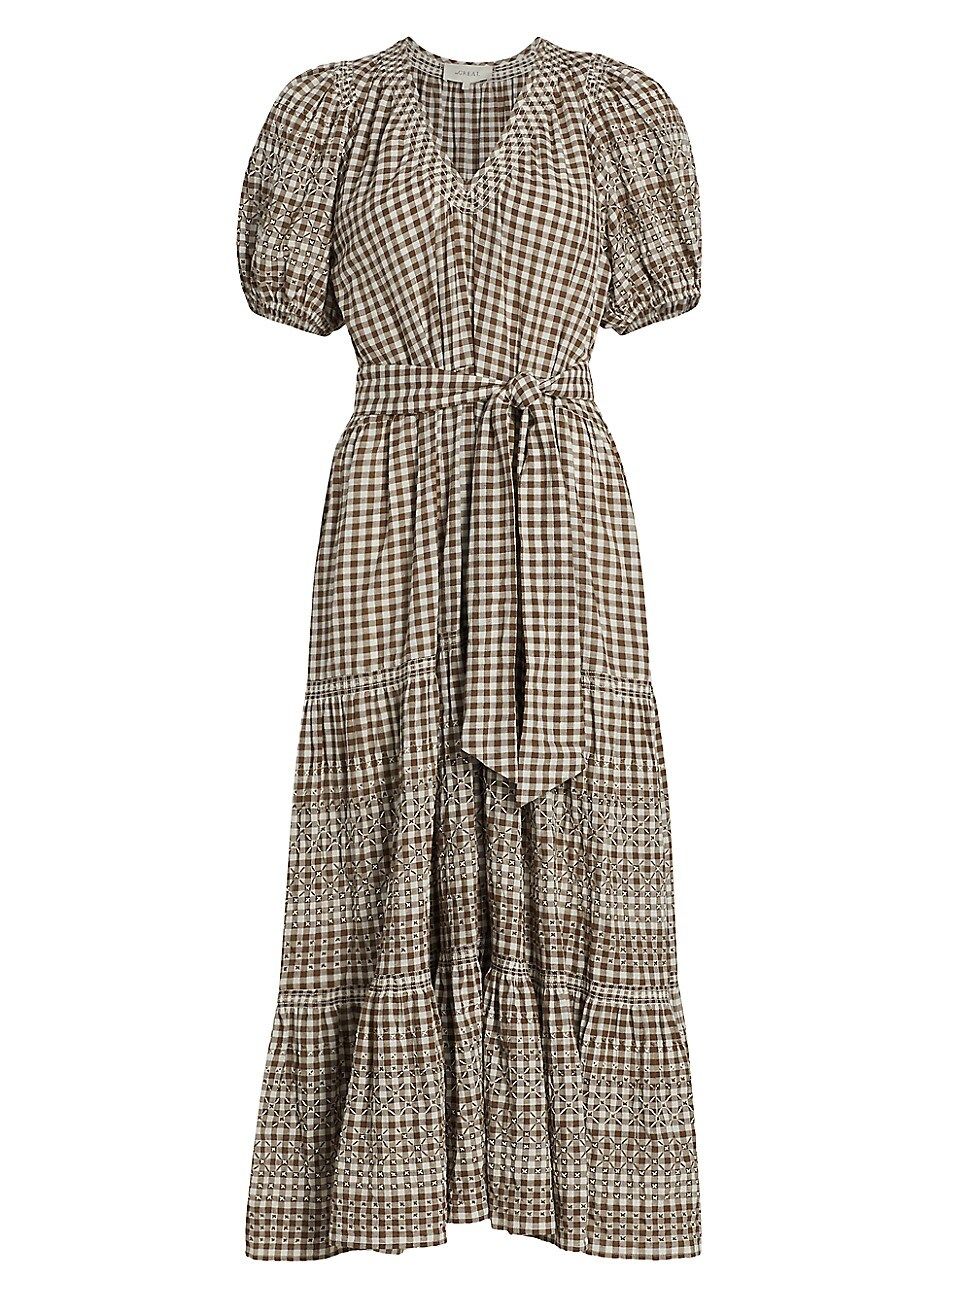 Women's The Cross-Stitch Embroidered Dakota Maxi Dress - Army And White Gingham - Size Small | Saks Fifth Avenue